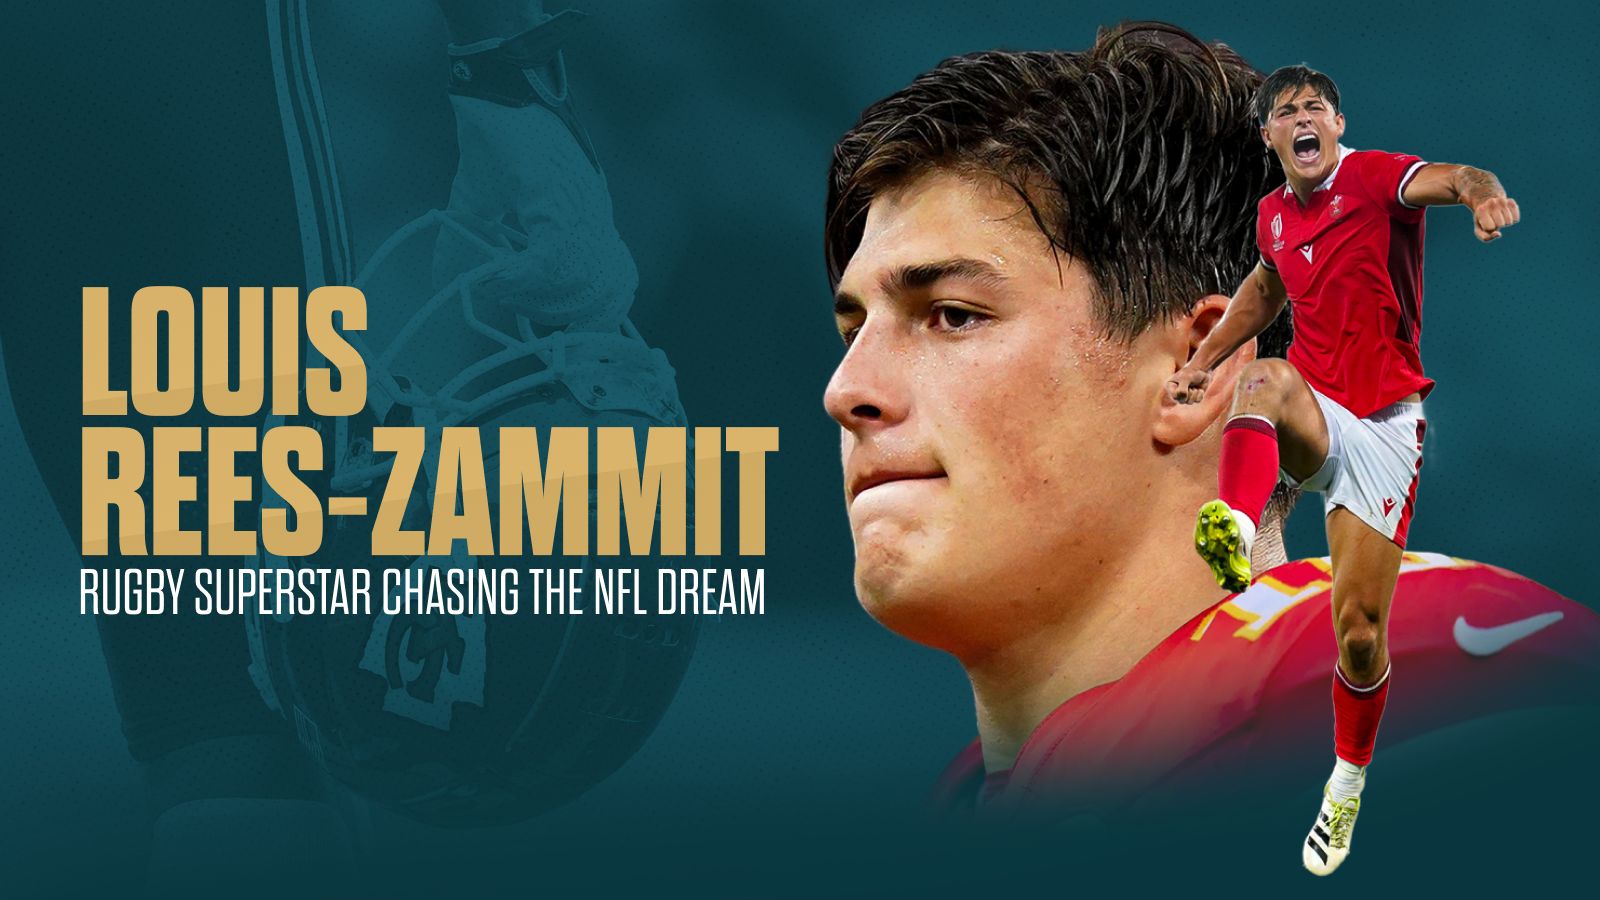 louis rees-zammit: from breakout teenage sensation to joining the super bowl champions